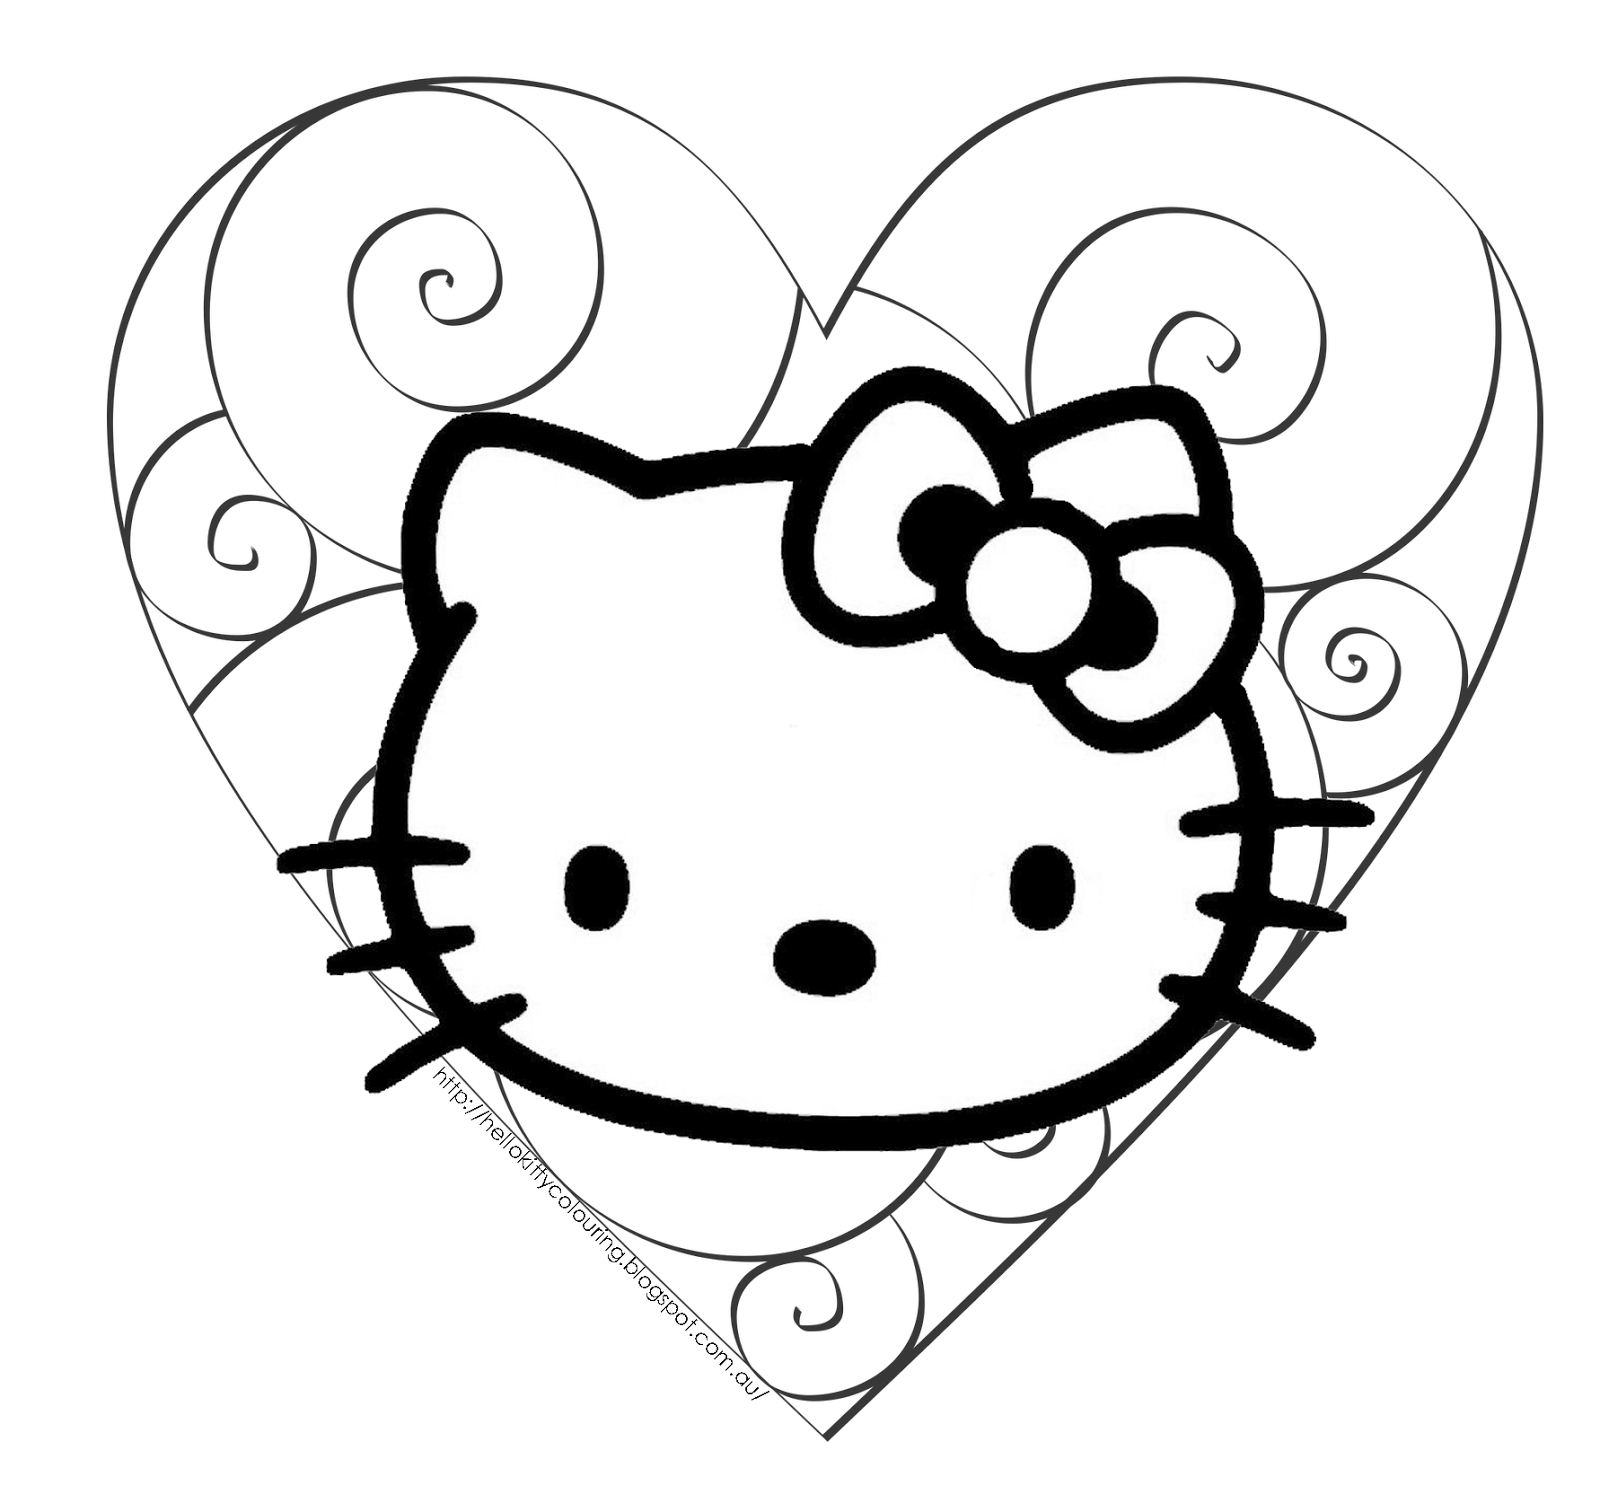 Hello Kitty Coloring Pages Coloring Wallpapers Download Free Images Wallpaper [coloring436.blogspot.com]